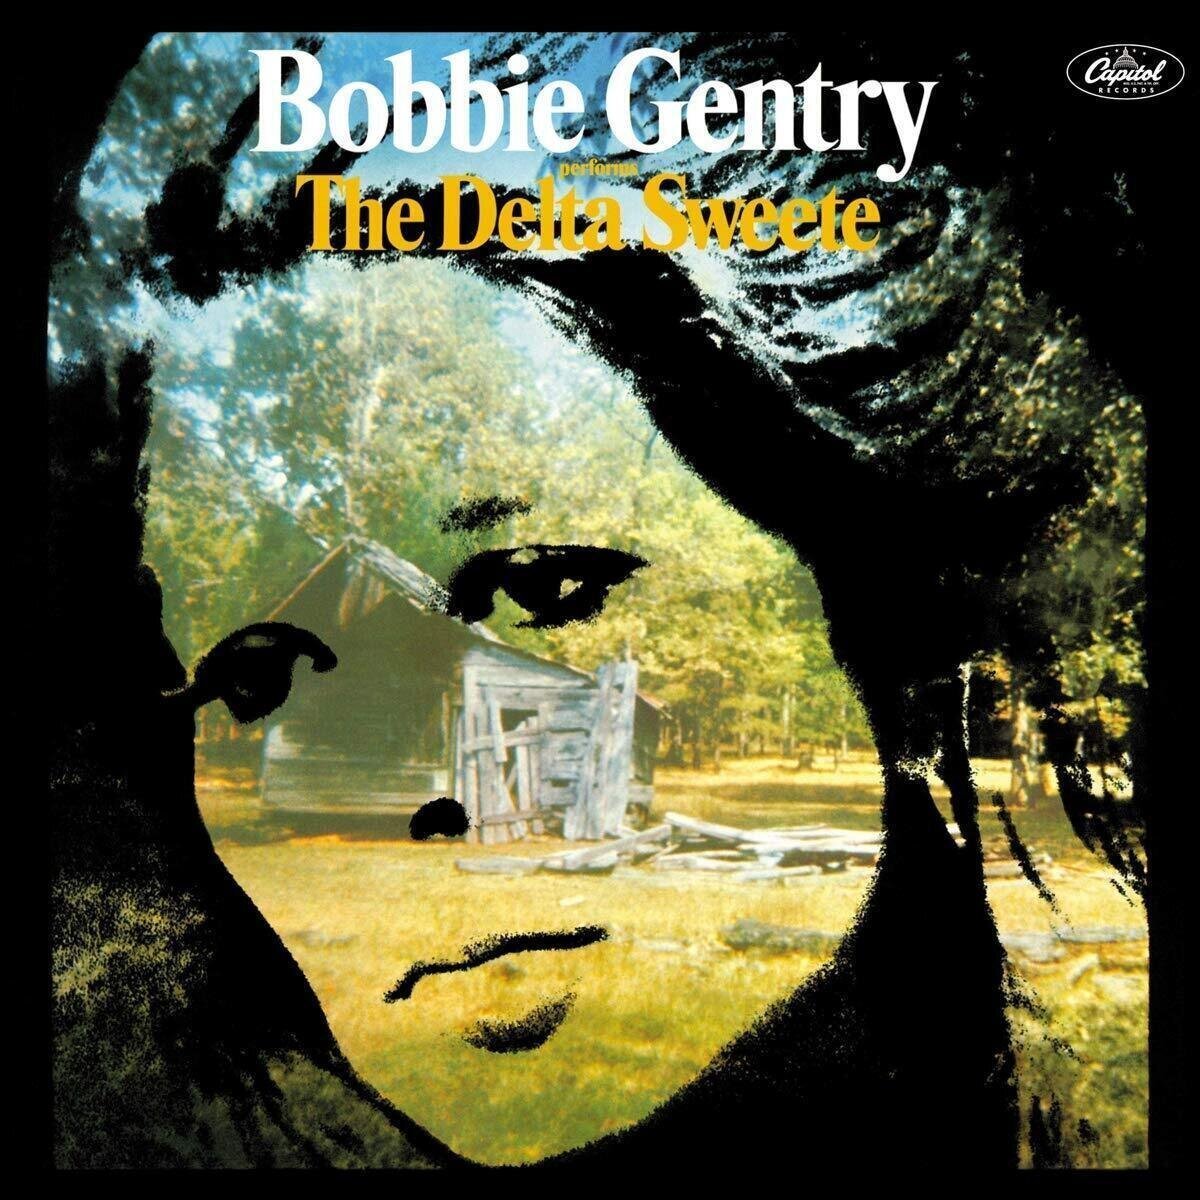 Vinyylilevy Bobbie Gentry - The Delta Sweete (Deluxe Edition) (2 LP)